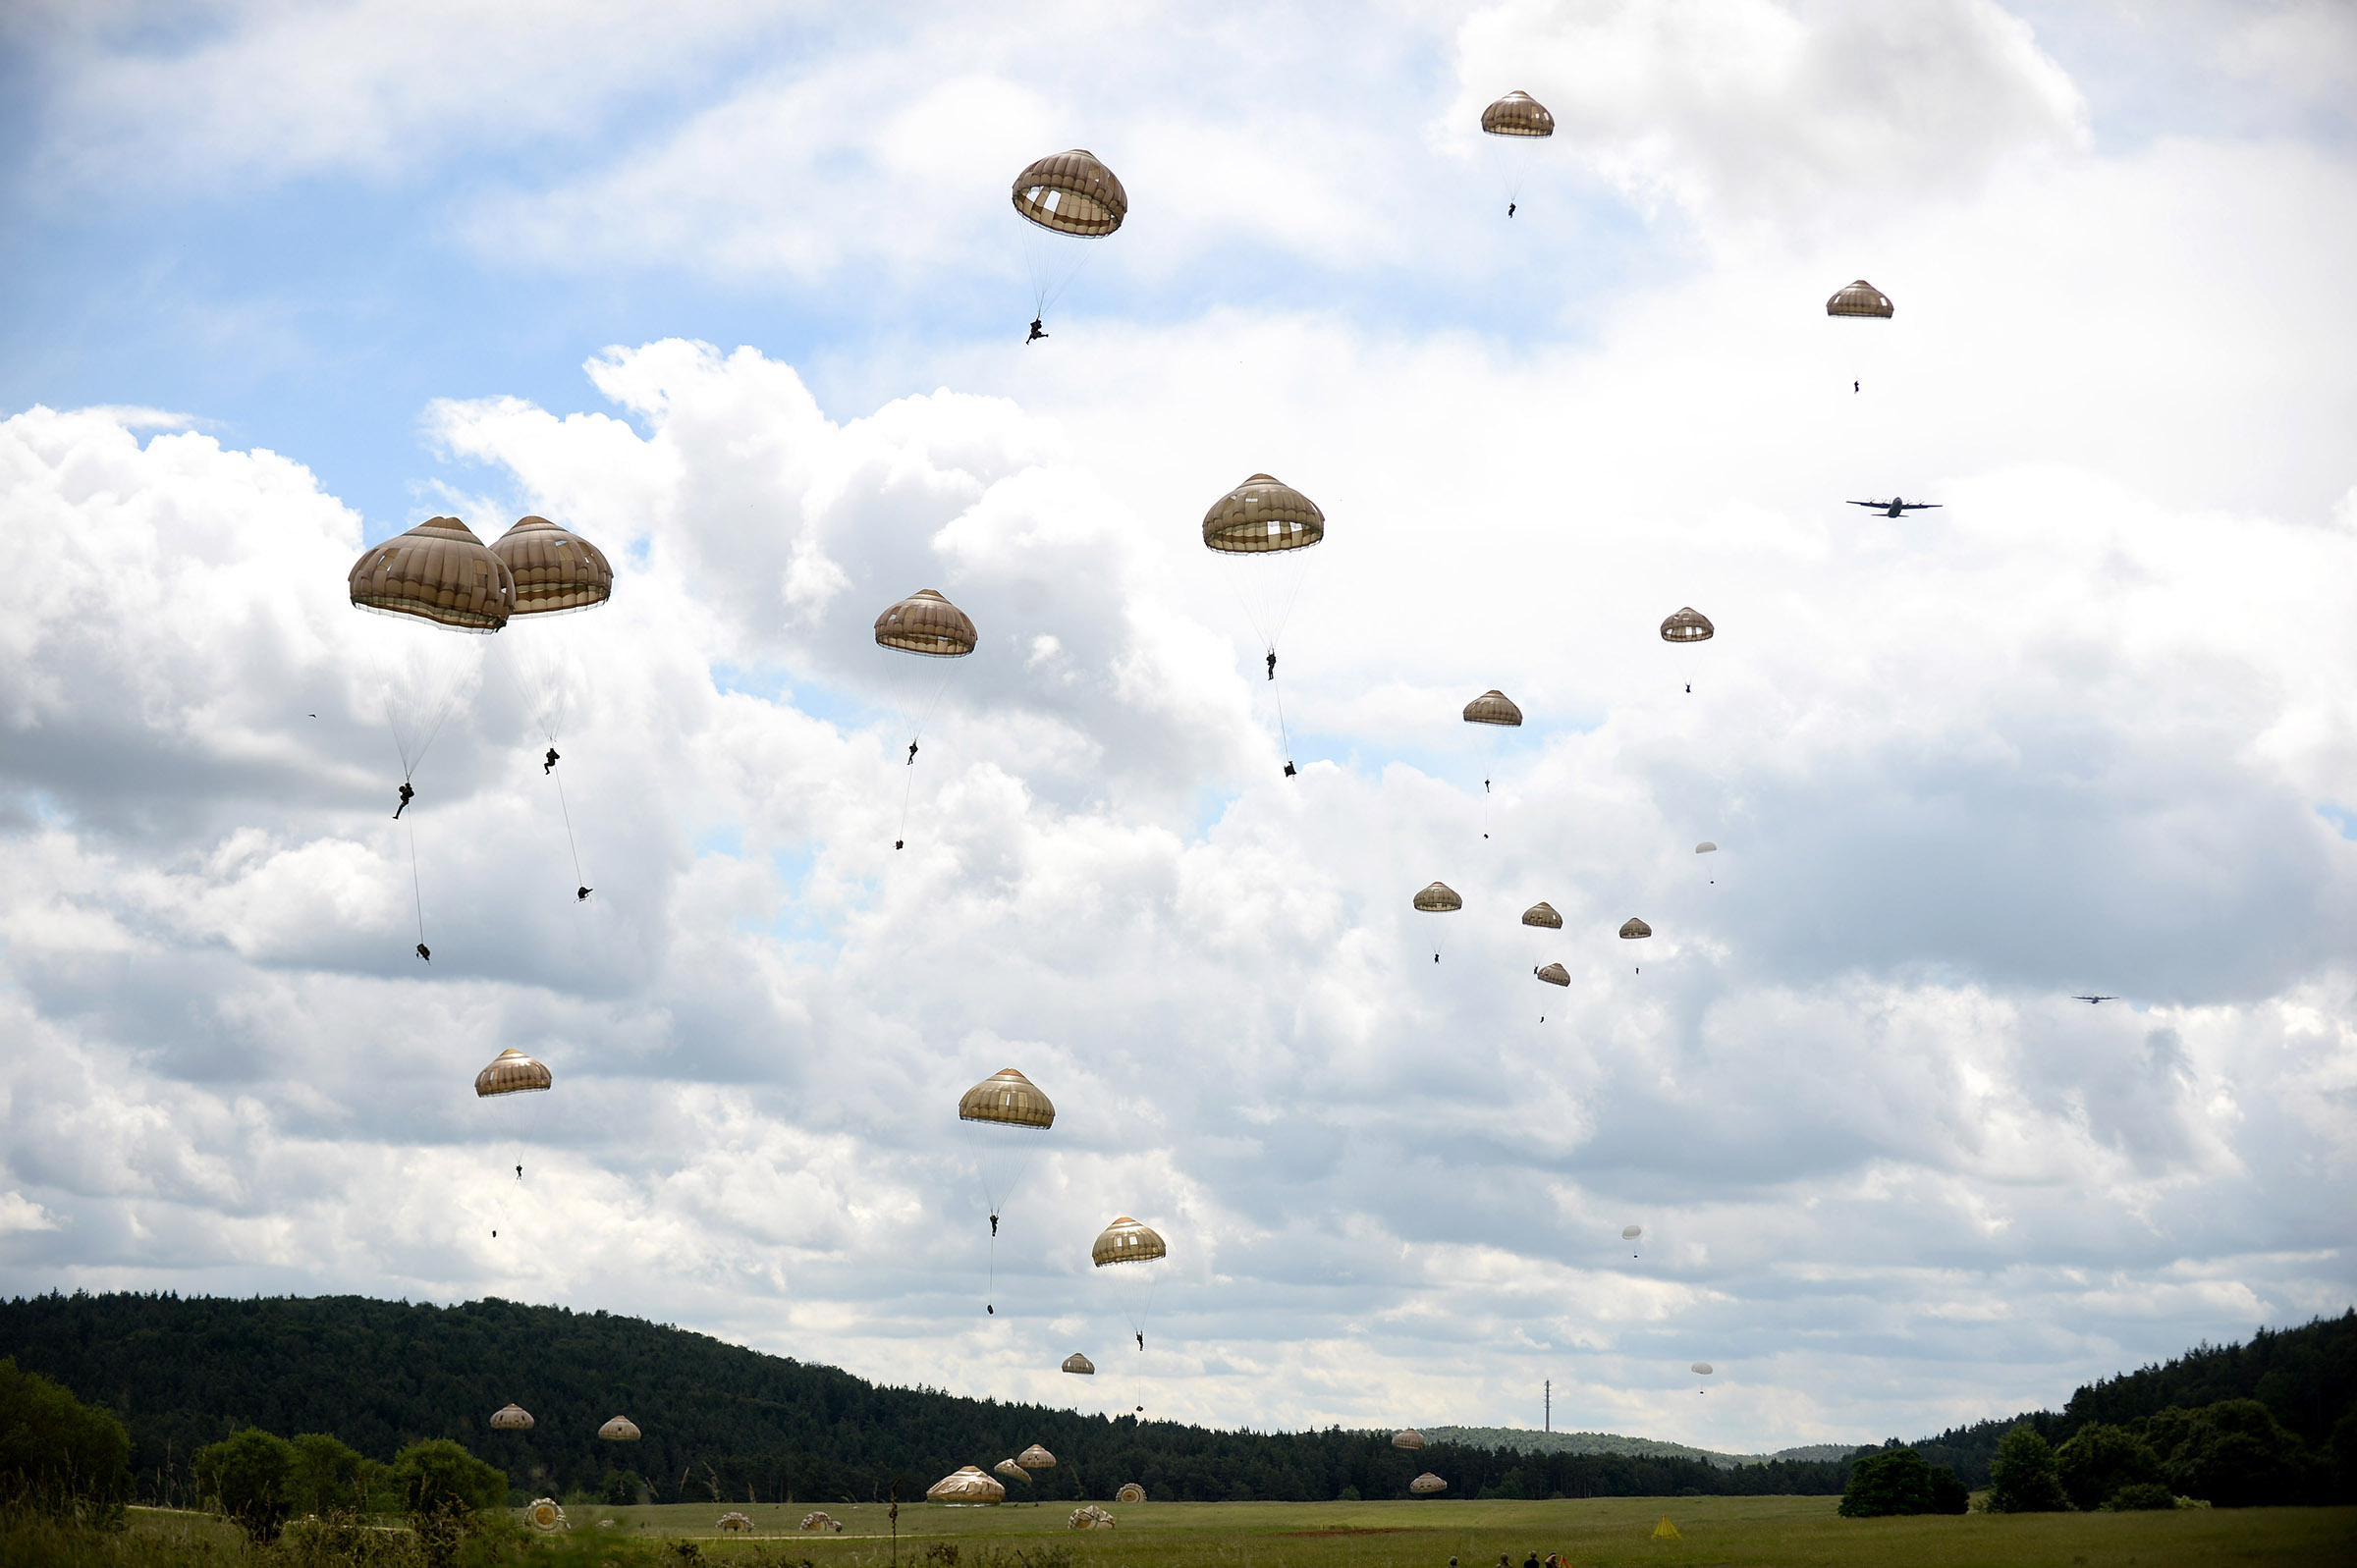   British airborne forces are training alongside NATO counterparts to develop their ability to work together to deliver a Swift Response to international crises. 16 Air Assault Brigade is on Exercise Swift Response, which brings together more than 5,000 personnel from 10 nations and takes place in Poland and Germany between May 27-June 26, 2016. Under the command of Headquarters 16 Air Assault Brigade some 2,000 troops are taking part, the largest British contingent to deploy on a NATO exercise in 2016. The joint force includes 3 PARA Battlegroup, including engineer, artillery, logistics, signals, medical, provost and ISTAR support; Apache attack helicopters from 4 Regiment Army Air Corps; and RAF Chinook and Puma support helicopters and C-130 Hercules transport aircraft. The training involves mass parachute jumps and air assault operations as part of a simulated mission to restore stability to a troubled region. It is key to developing interoperability with 82nd Airborne Division and 11e Brigade Parachutists, the Brigades key partners in the US and French armies respectively, as well as wider allies. NOTE TO DESKS: MoD release authorised handout images. All images remain crown copyright. Photo credit to read - Corporal Andy Reddy RLC Email: andyreddy@mediaops.army.mod.uk richardwatt@mediaops.army.mod.uk shanewilkinson@mediaops.army.mod.uk